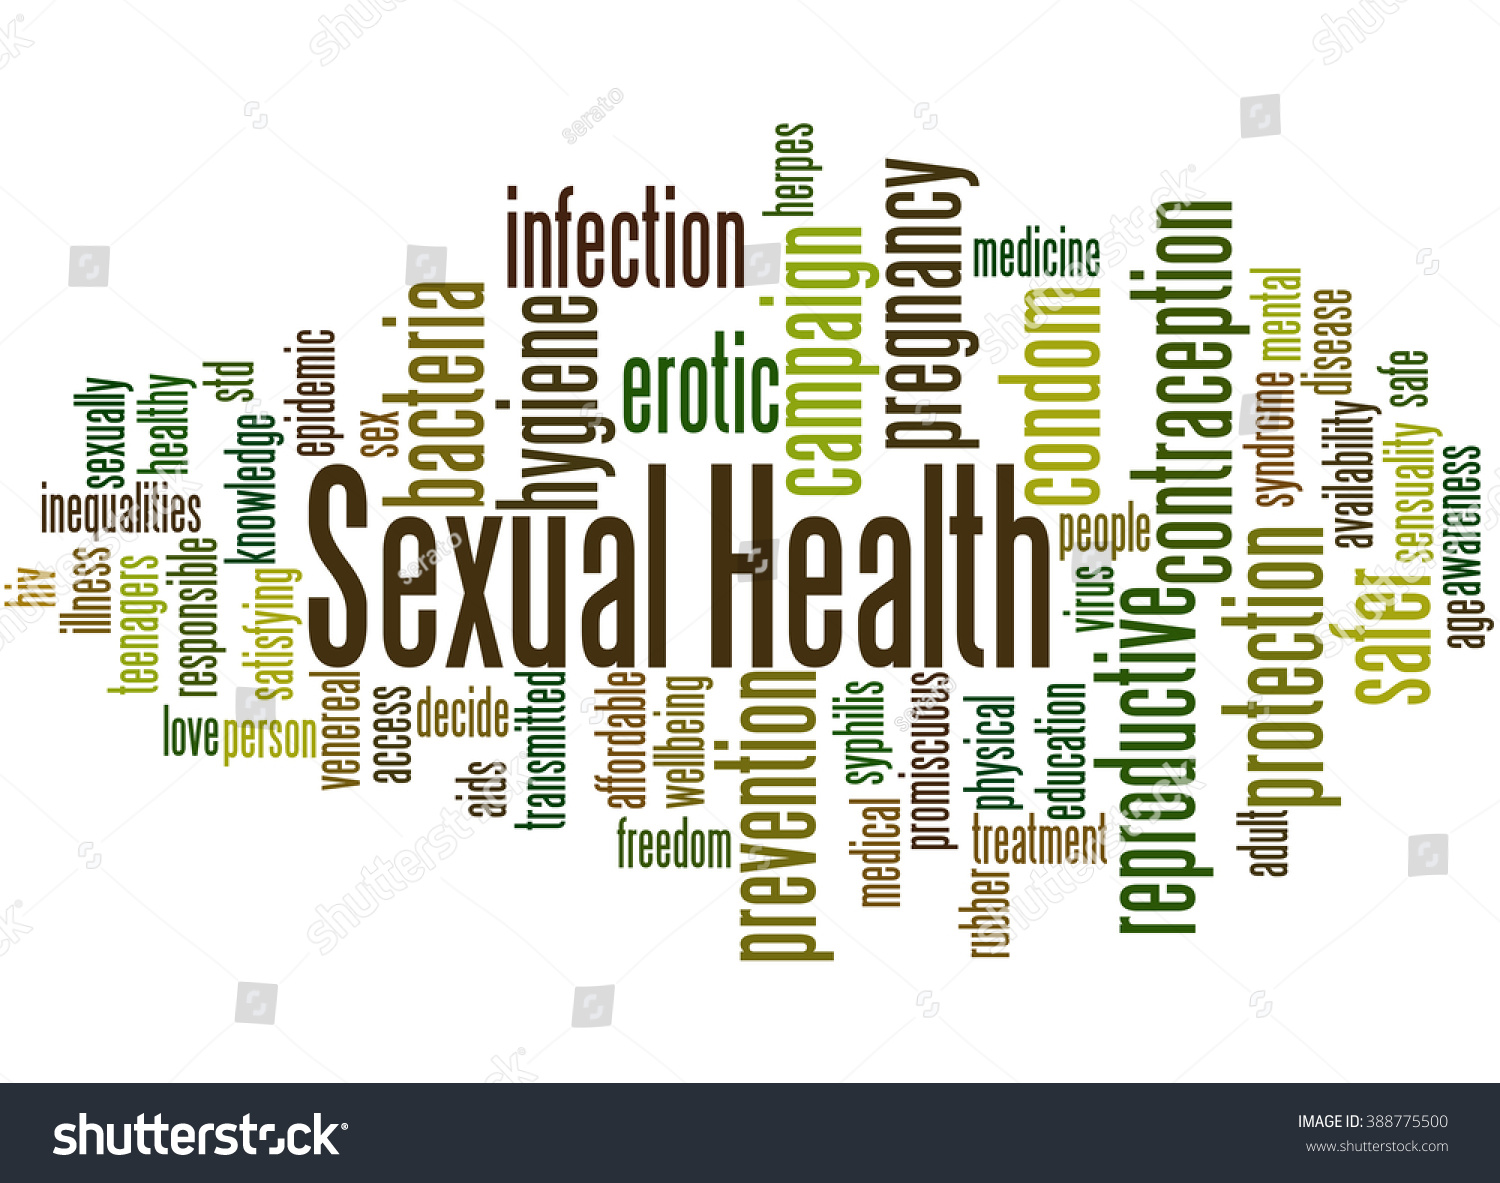 Sexual Health Word Cloud Concept On Stock Illustration 388775500 Shutterstock 6312